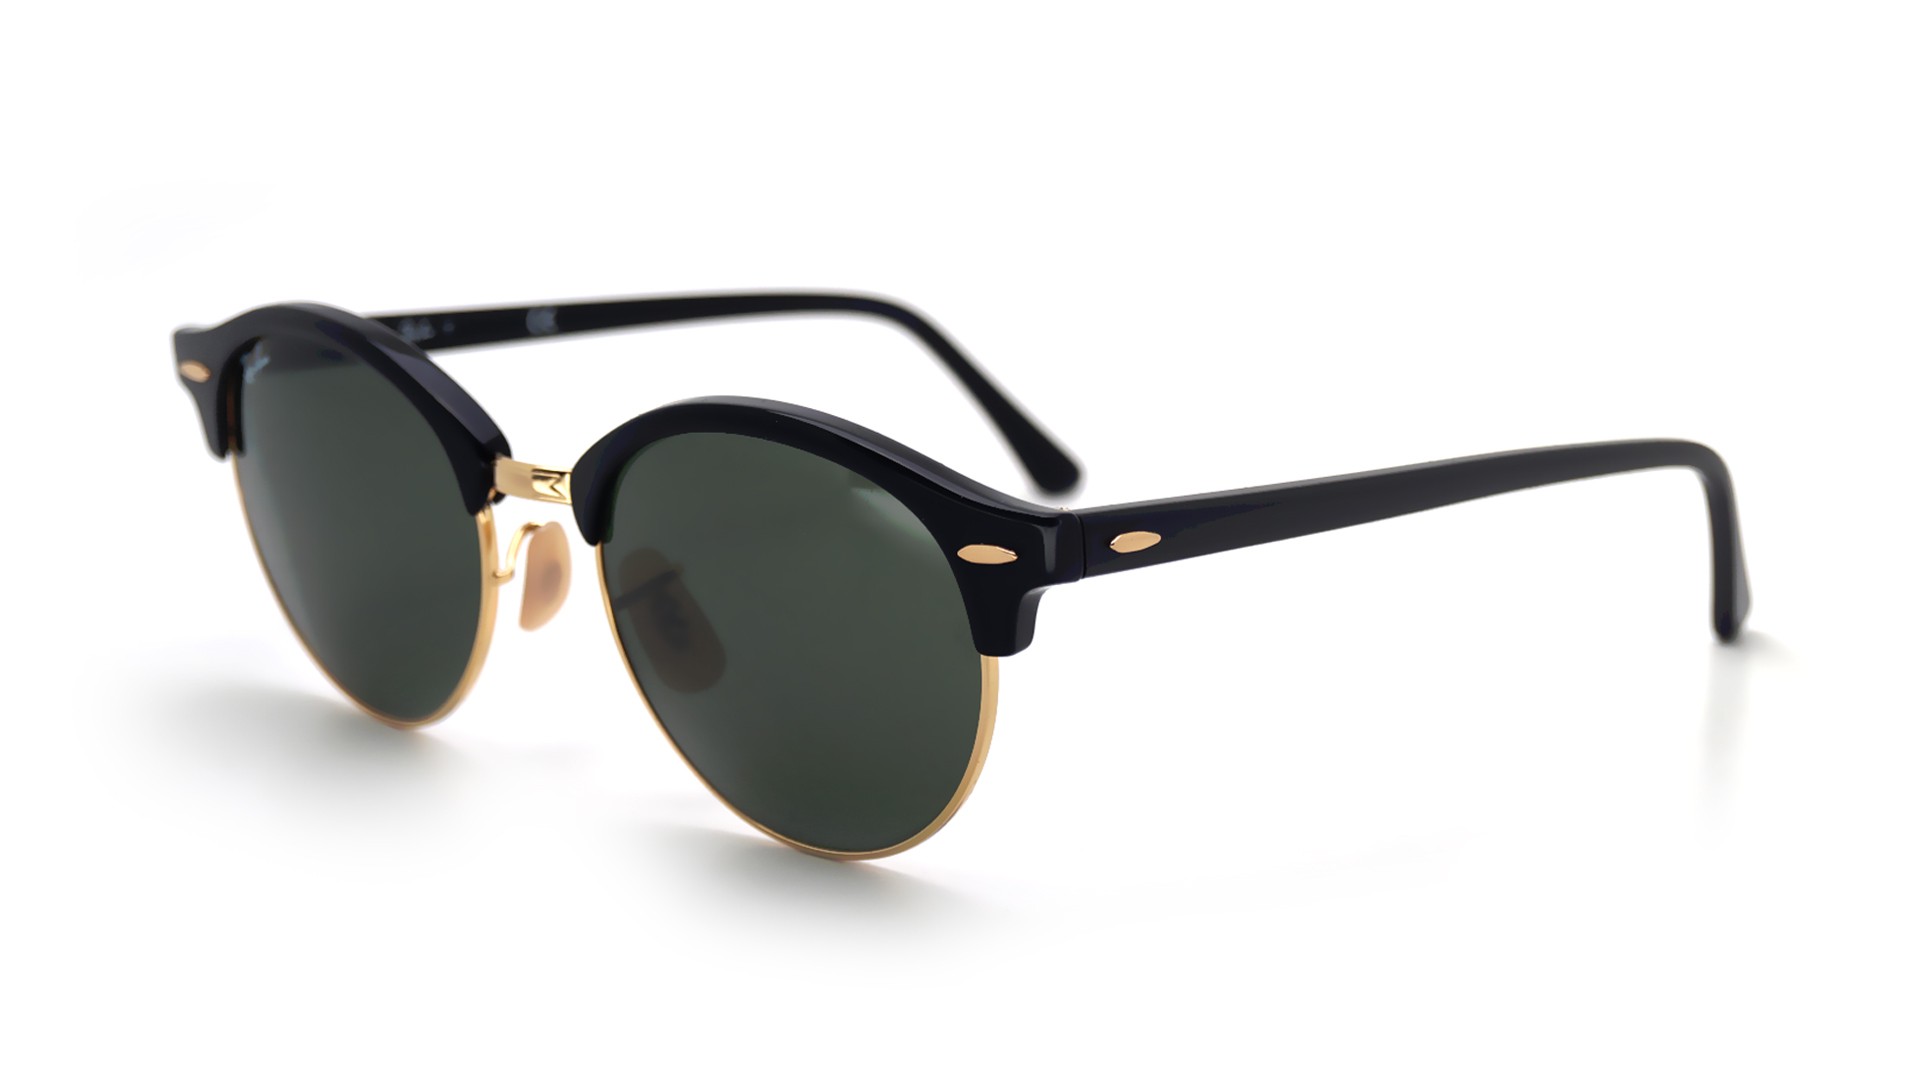 Ray-Ban Clubround Noir RB4246 901 51-19 